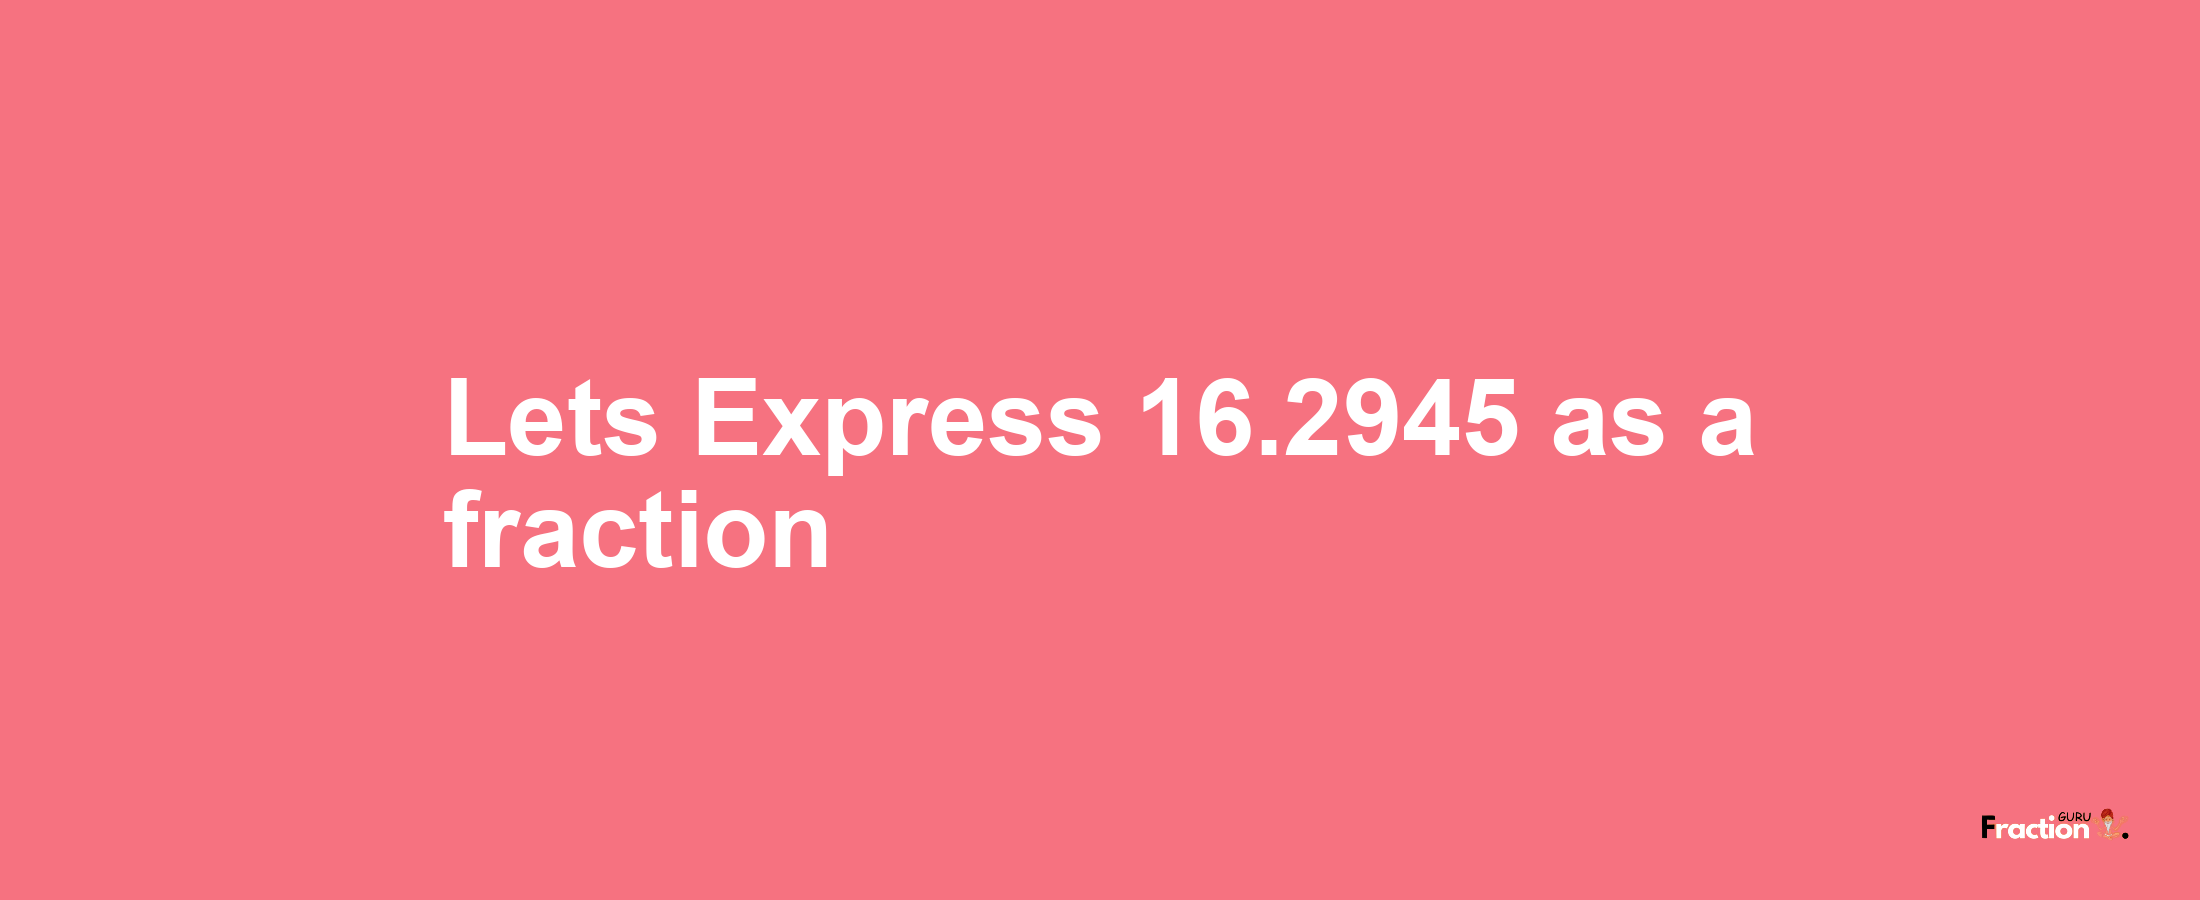 Lets Express 16.2945 as afraction